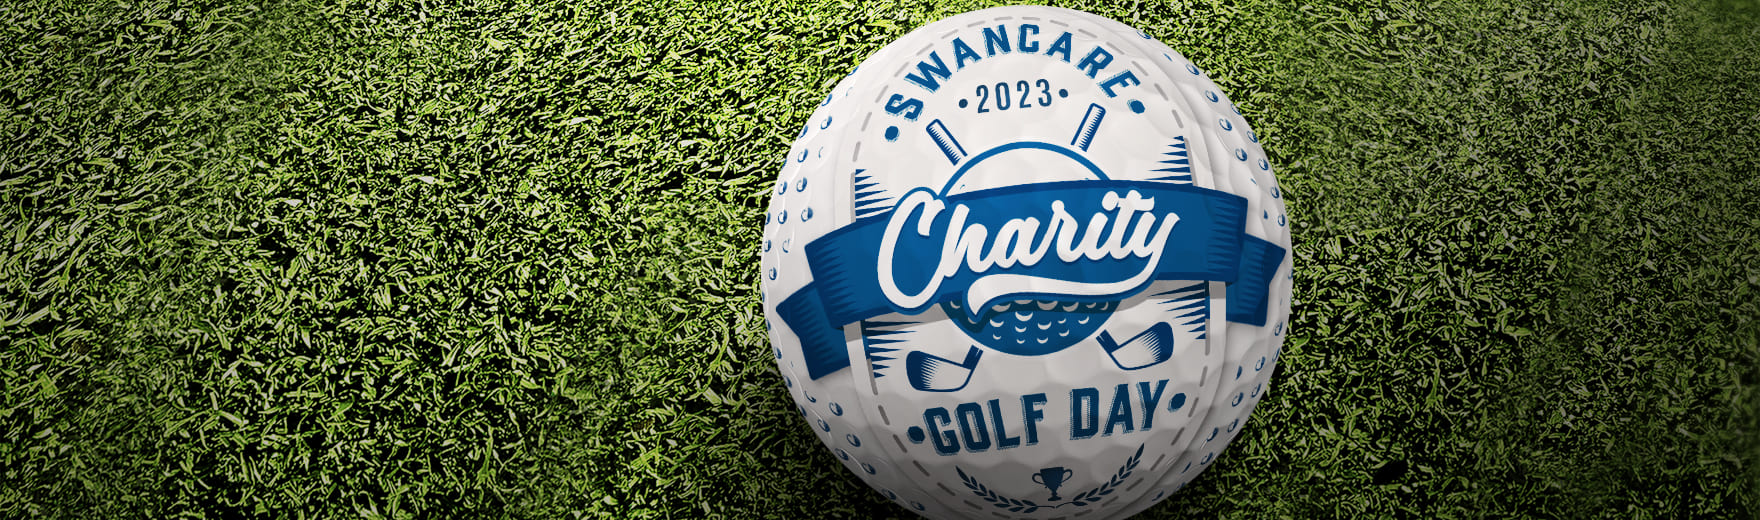 SwanCare Charity Golf Day